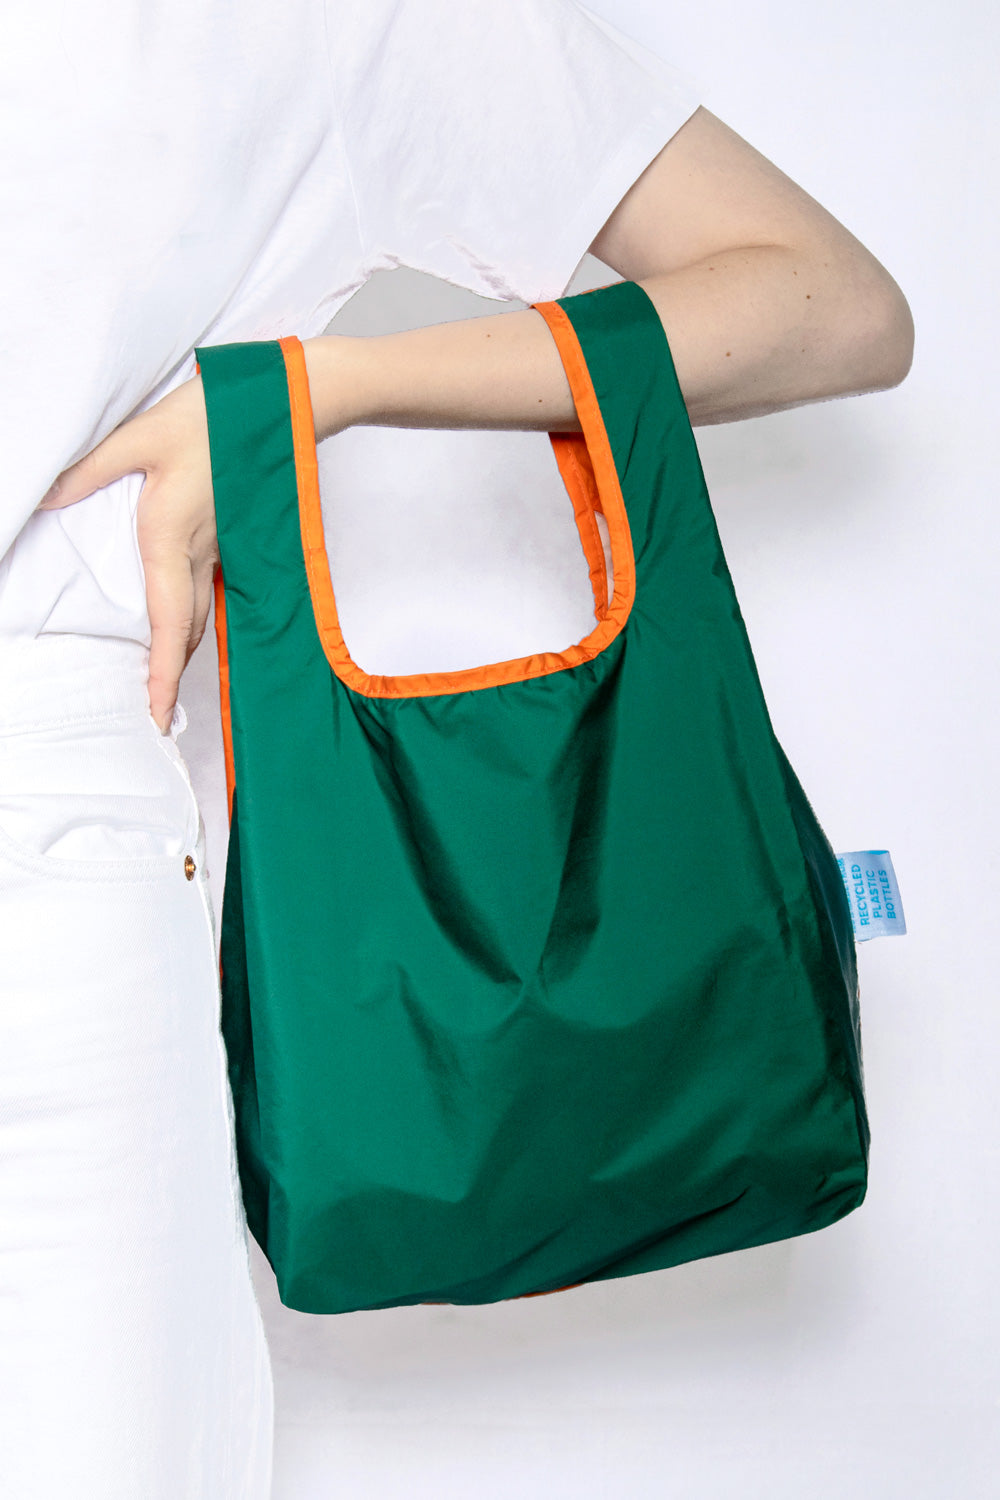 Orange & Green Mini - 100% recycled reusable bag by Kind Bag in Happy Zero  Waste